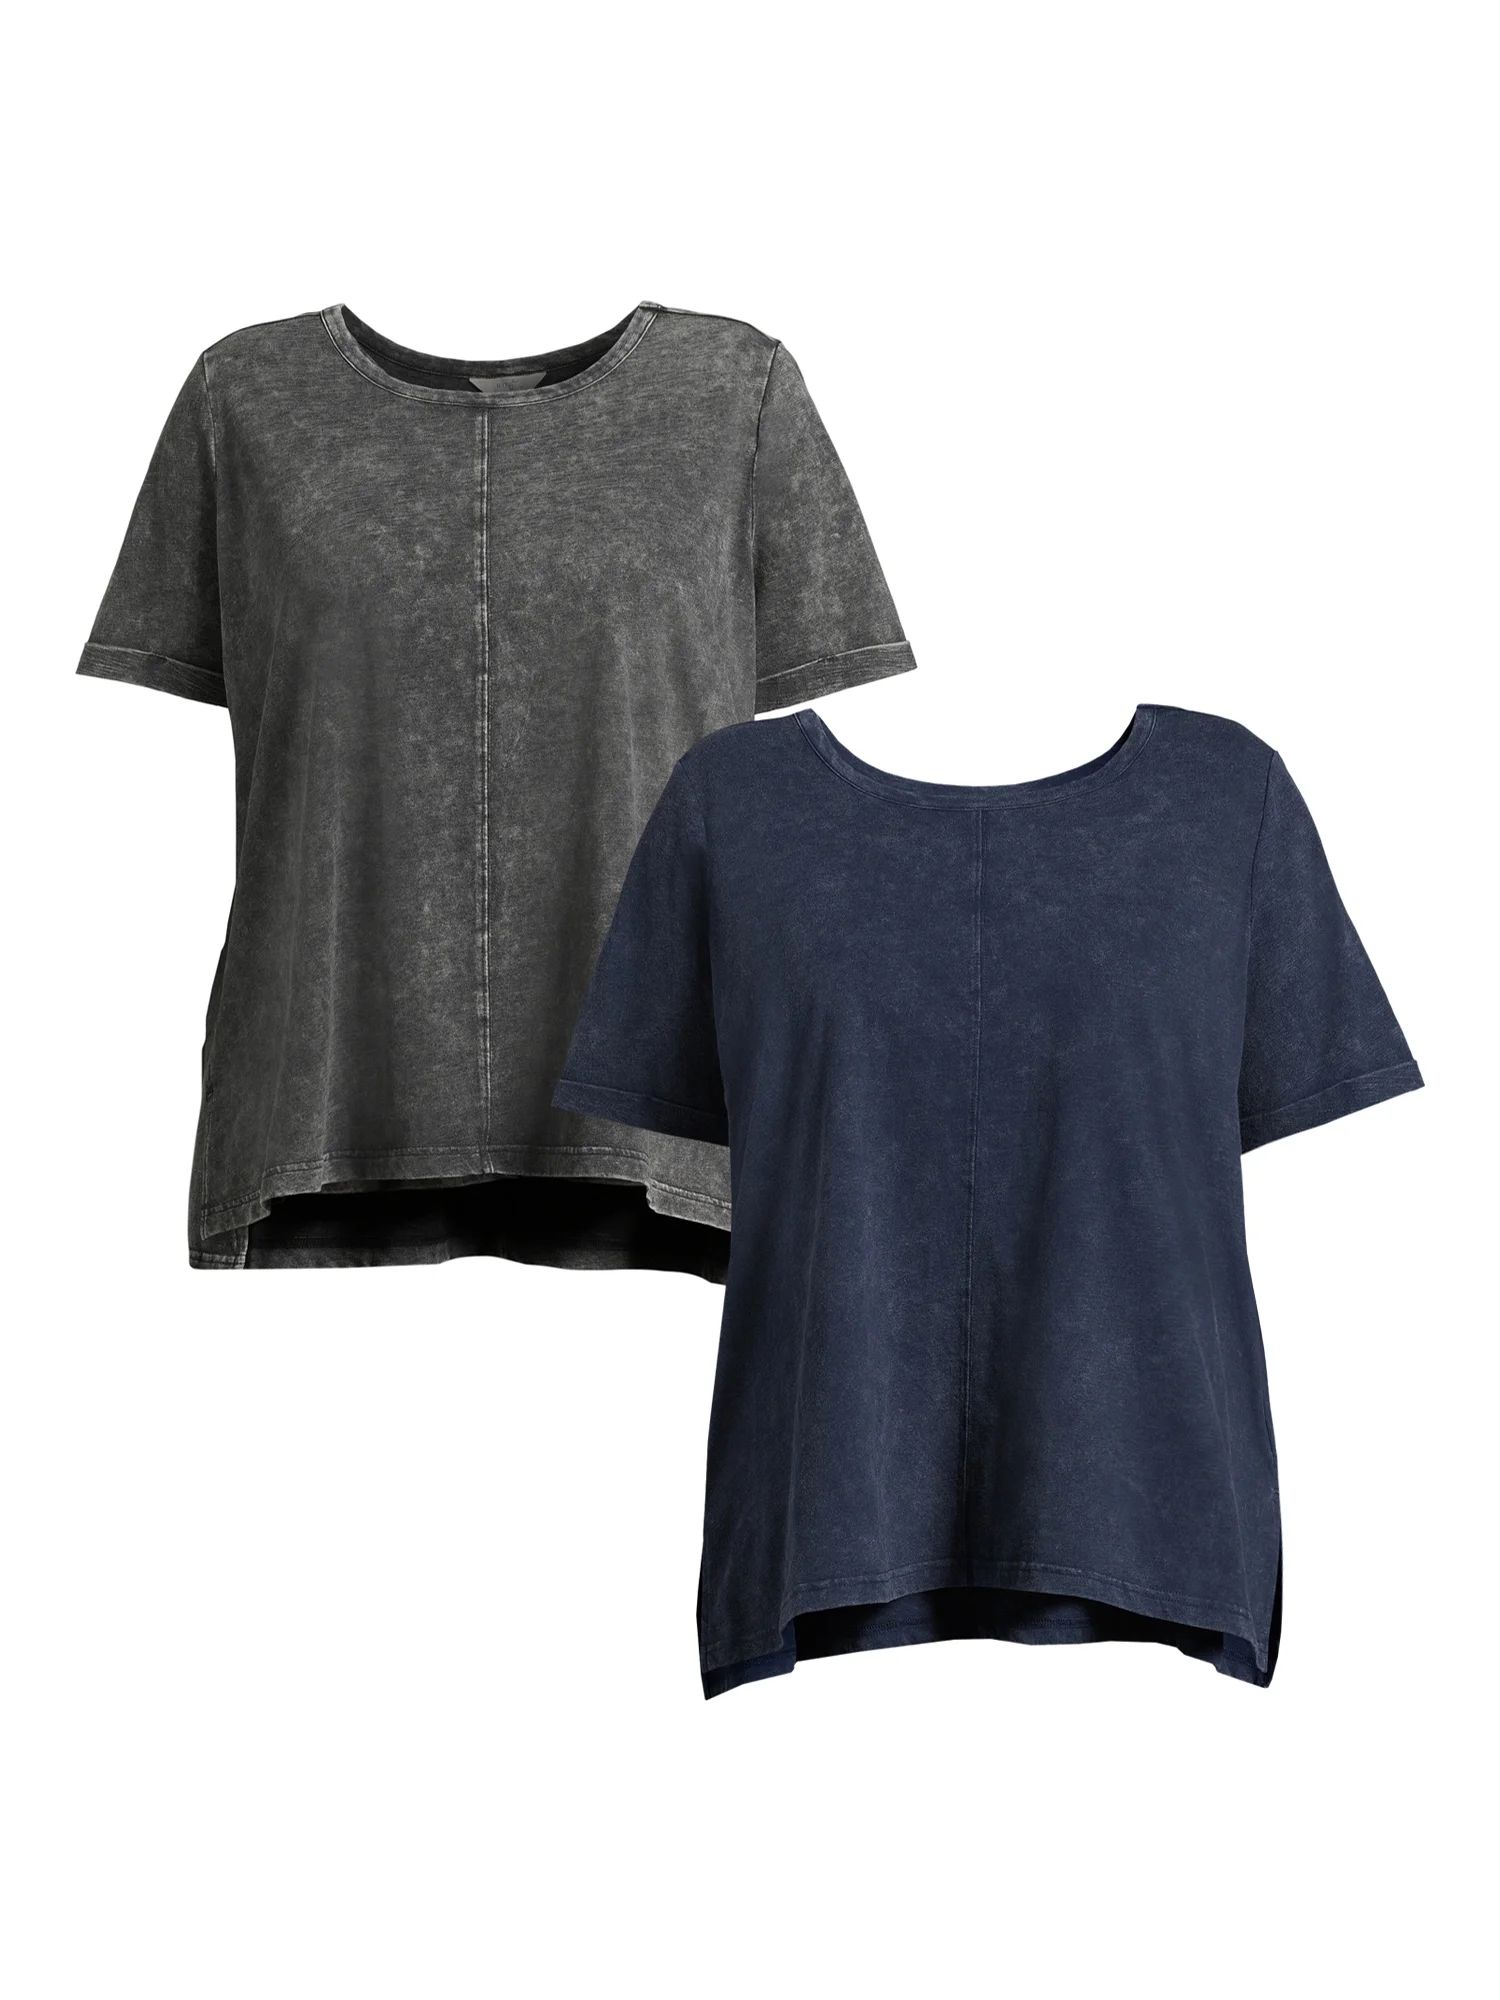 Terra & Sky Women's Plus Size Step Hem Tee with Rolled Cuff Elbow Sleeves, 2-Pack, Sizes 0X-4X | Walmart (US)